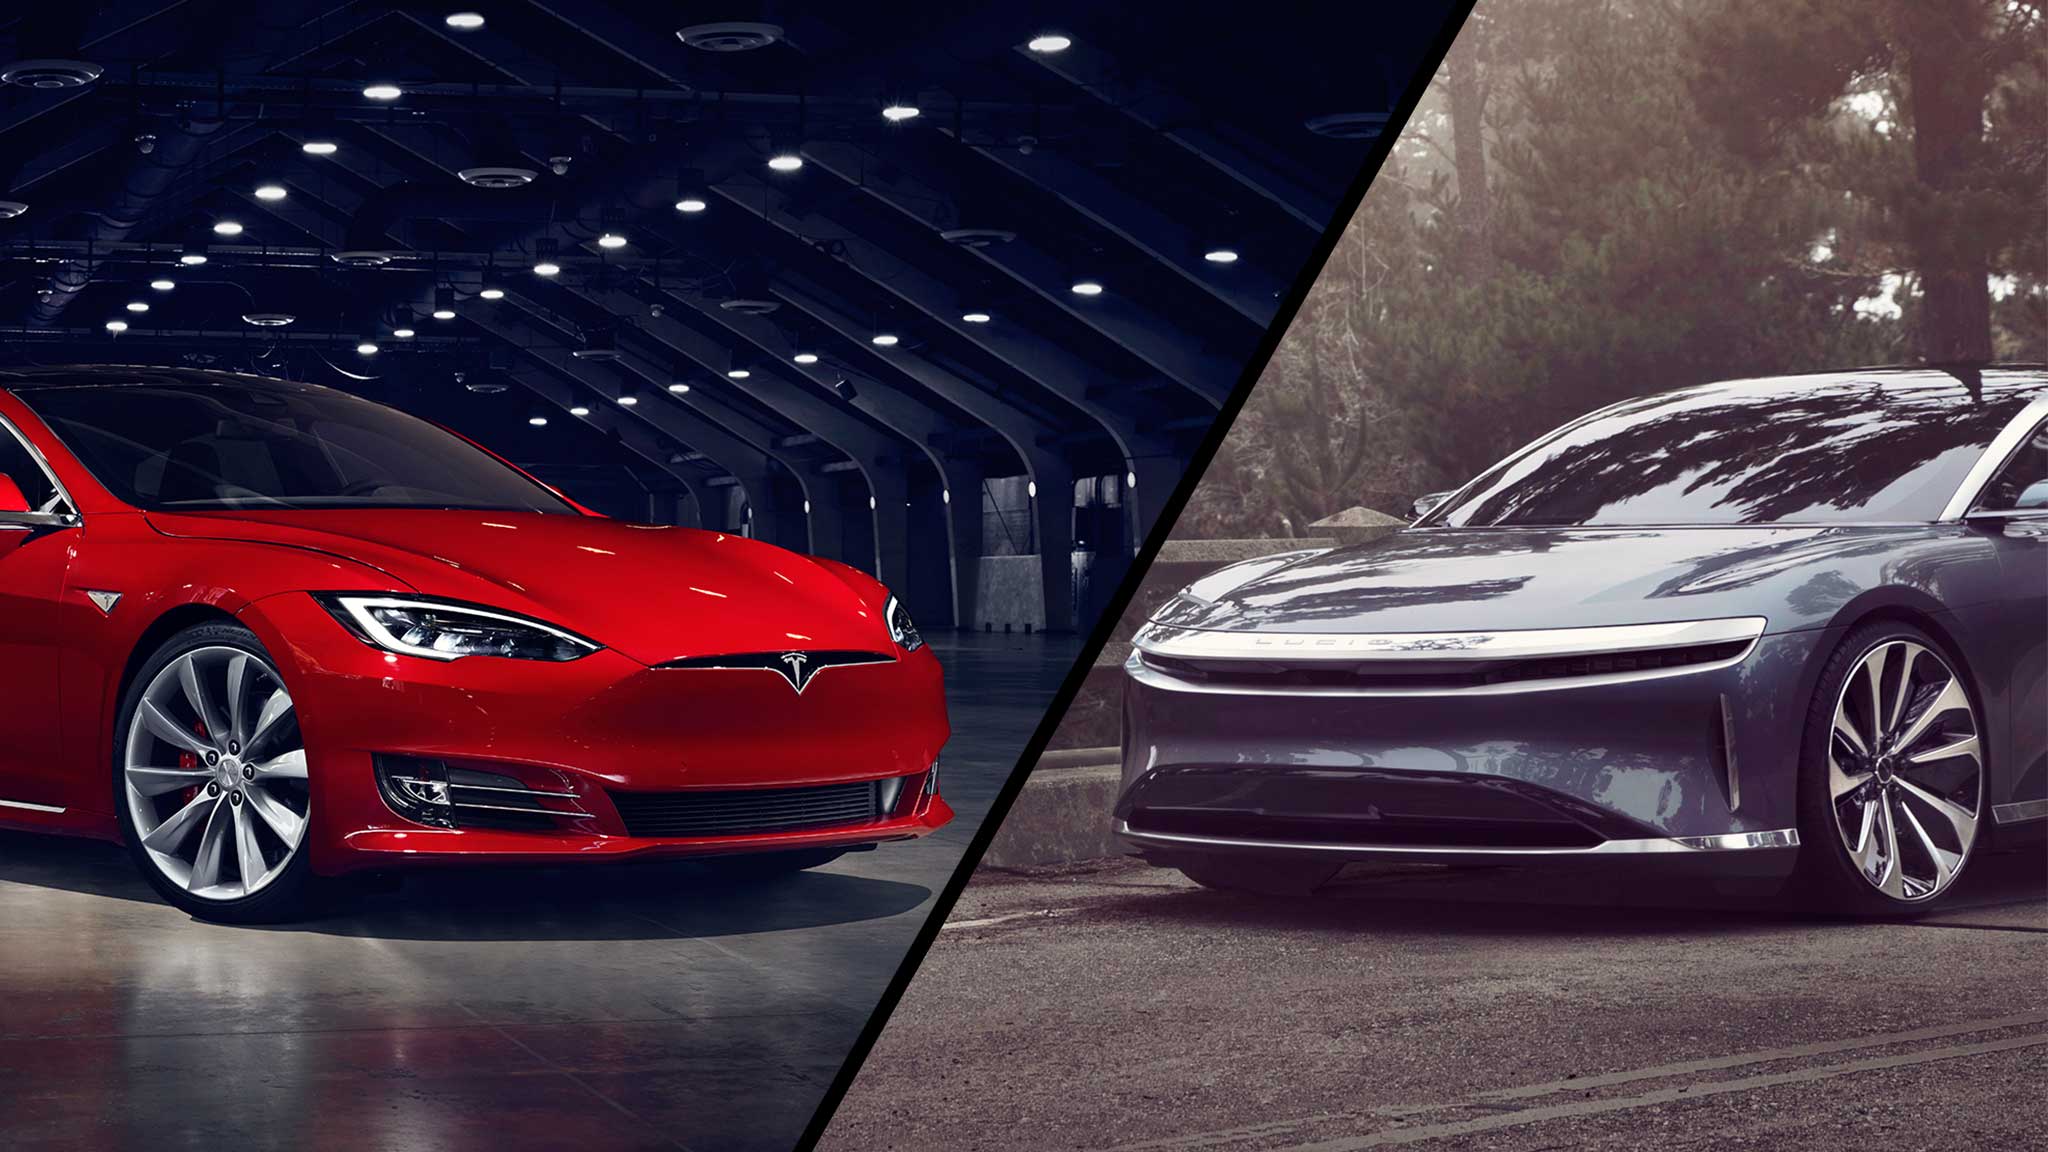 Great Tesla Cybertruck Vs Lucid Dream of the decade Check it out now 